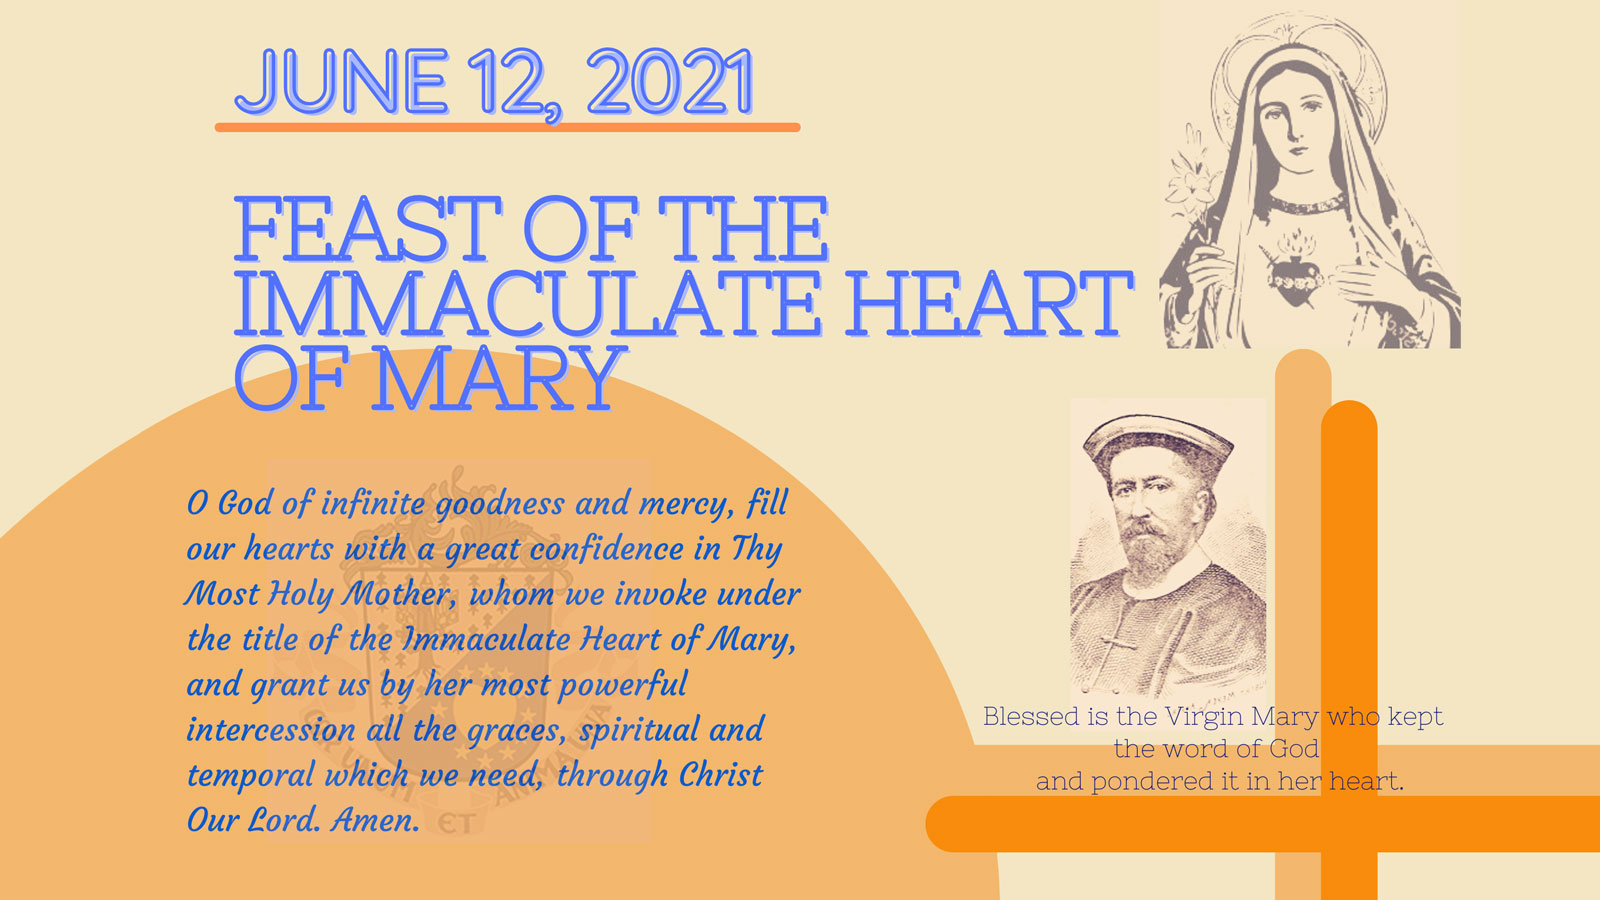 Feast of the Immaculate Heart of Mary - June 12, 2021